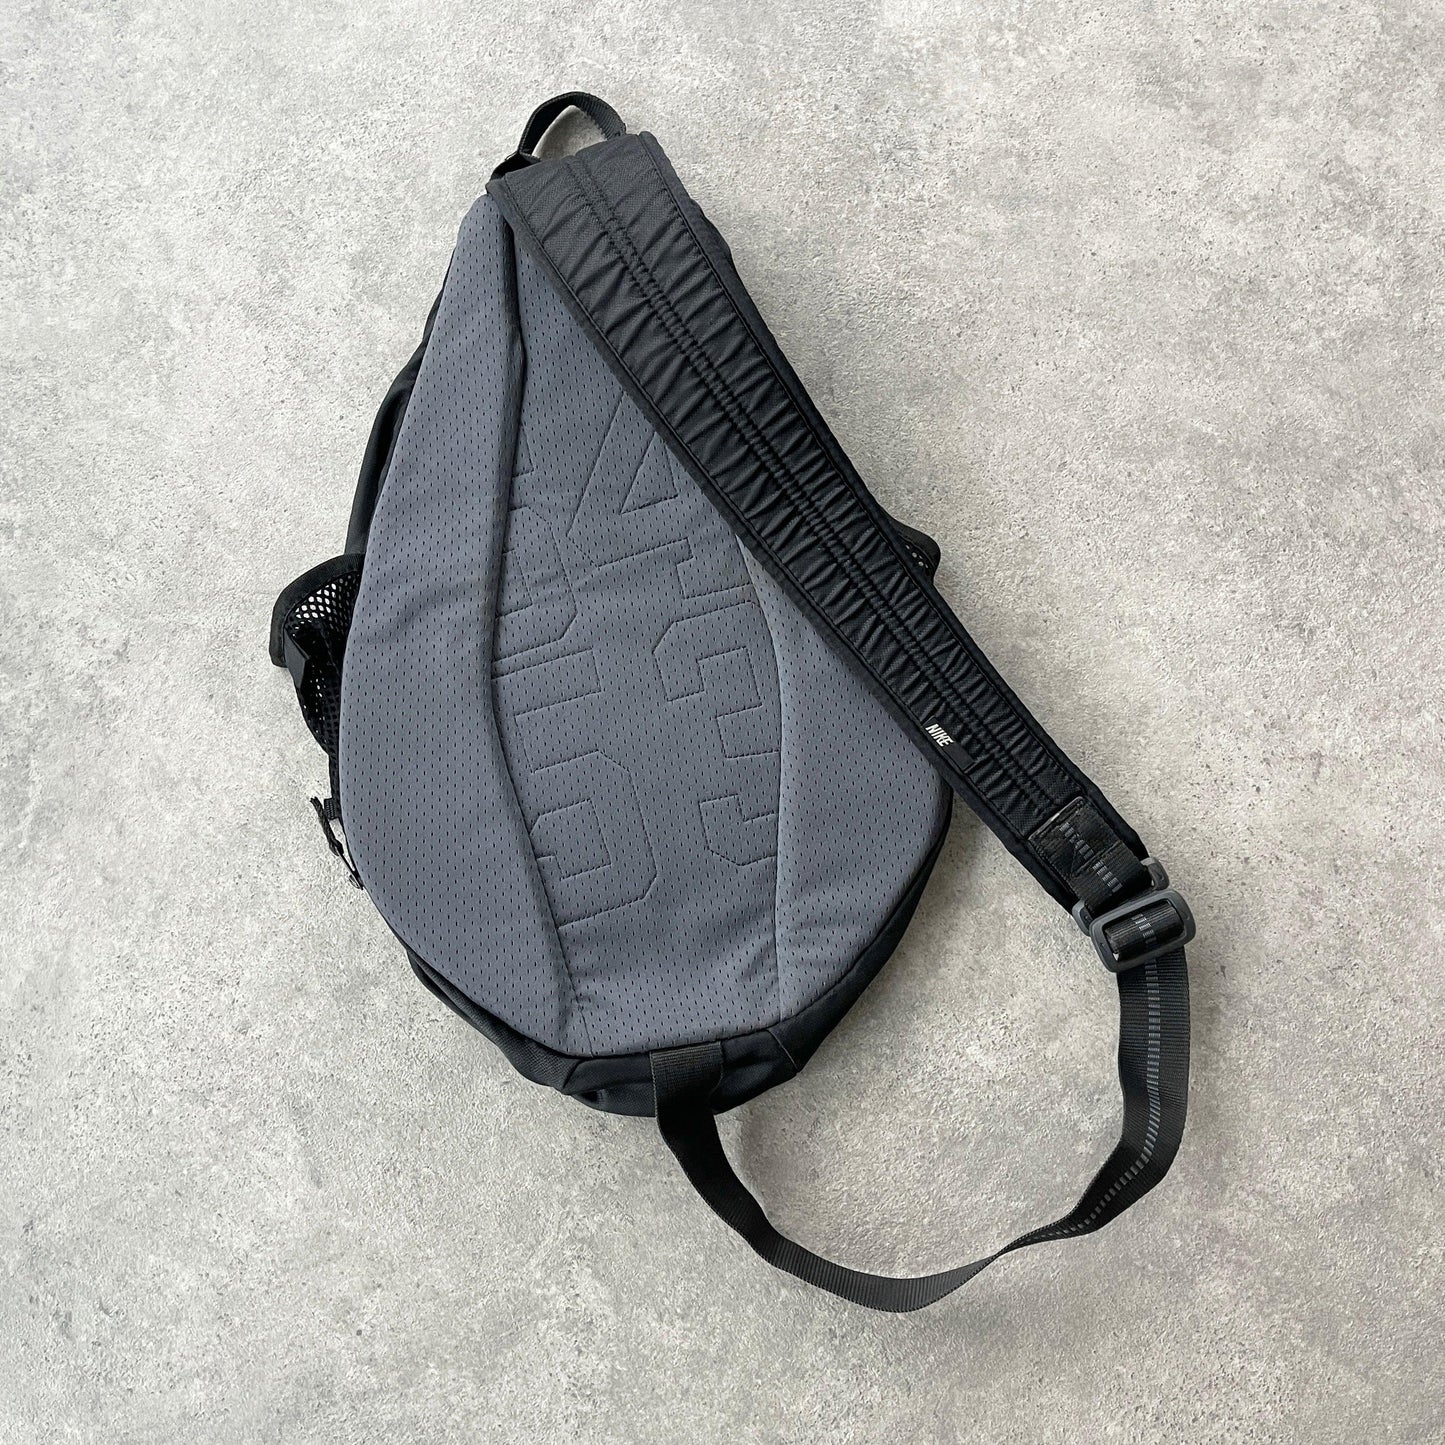 Nike 1990s technical tri-harness sling bag (21”x14”x7”) - Known Source